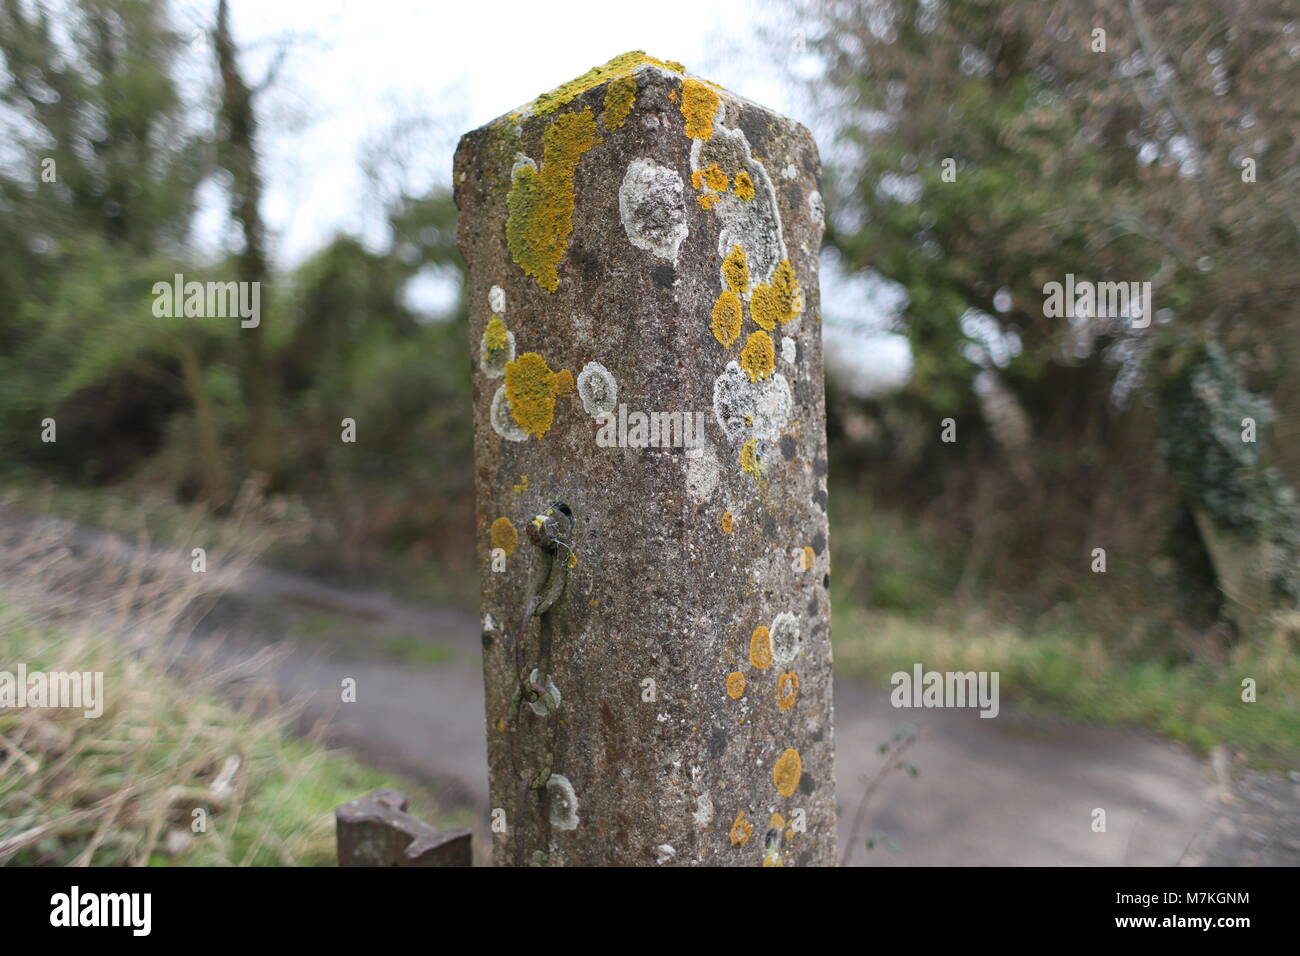 Remaining post of original level crossing at Henstridge station, part of the old Somerset and Dorset railway line lost to beeching cuts. Stock Photo